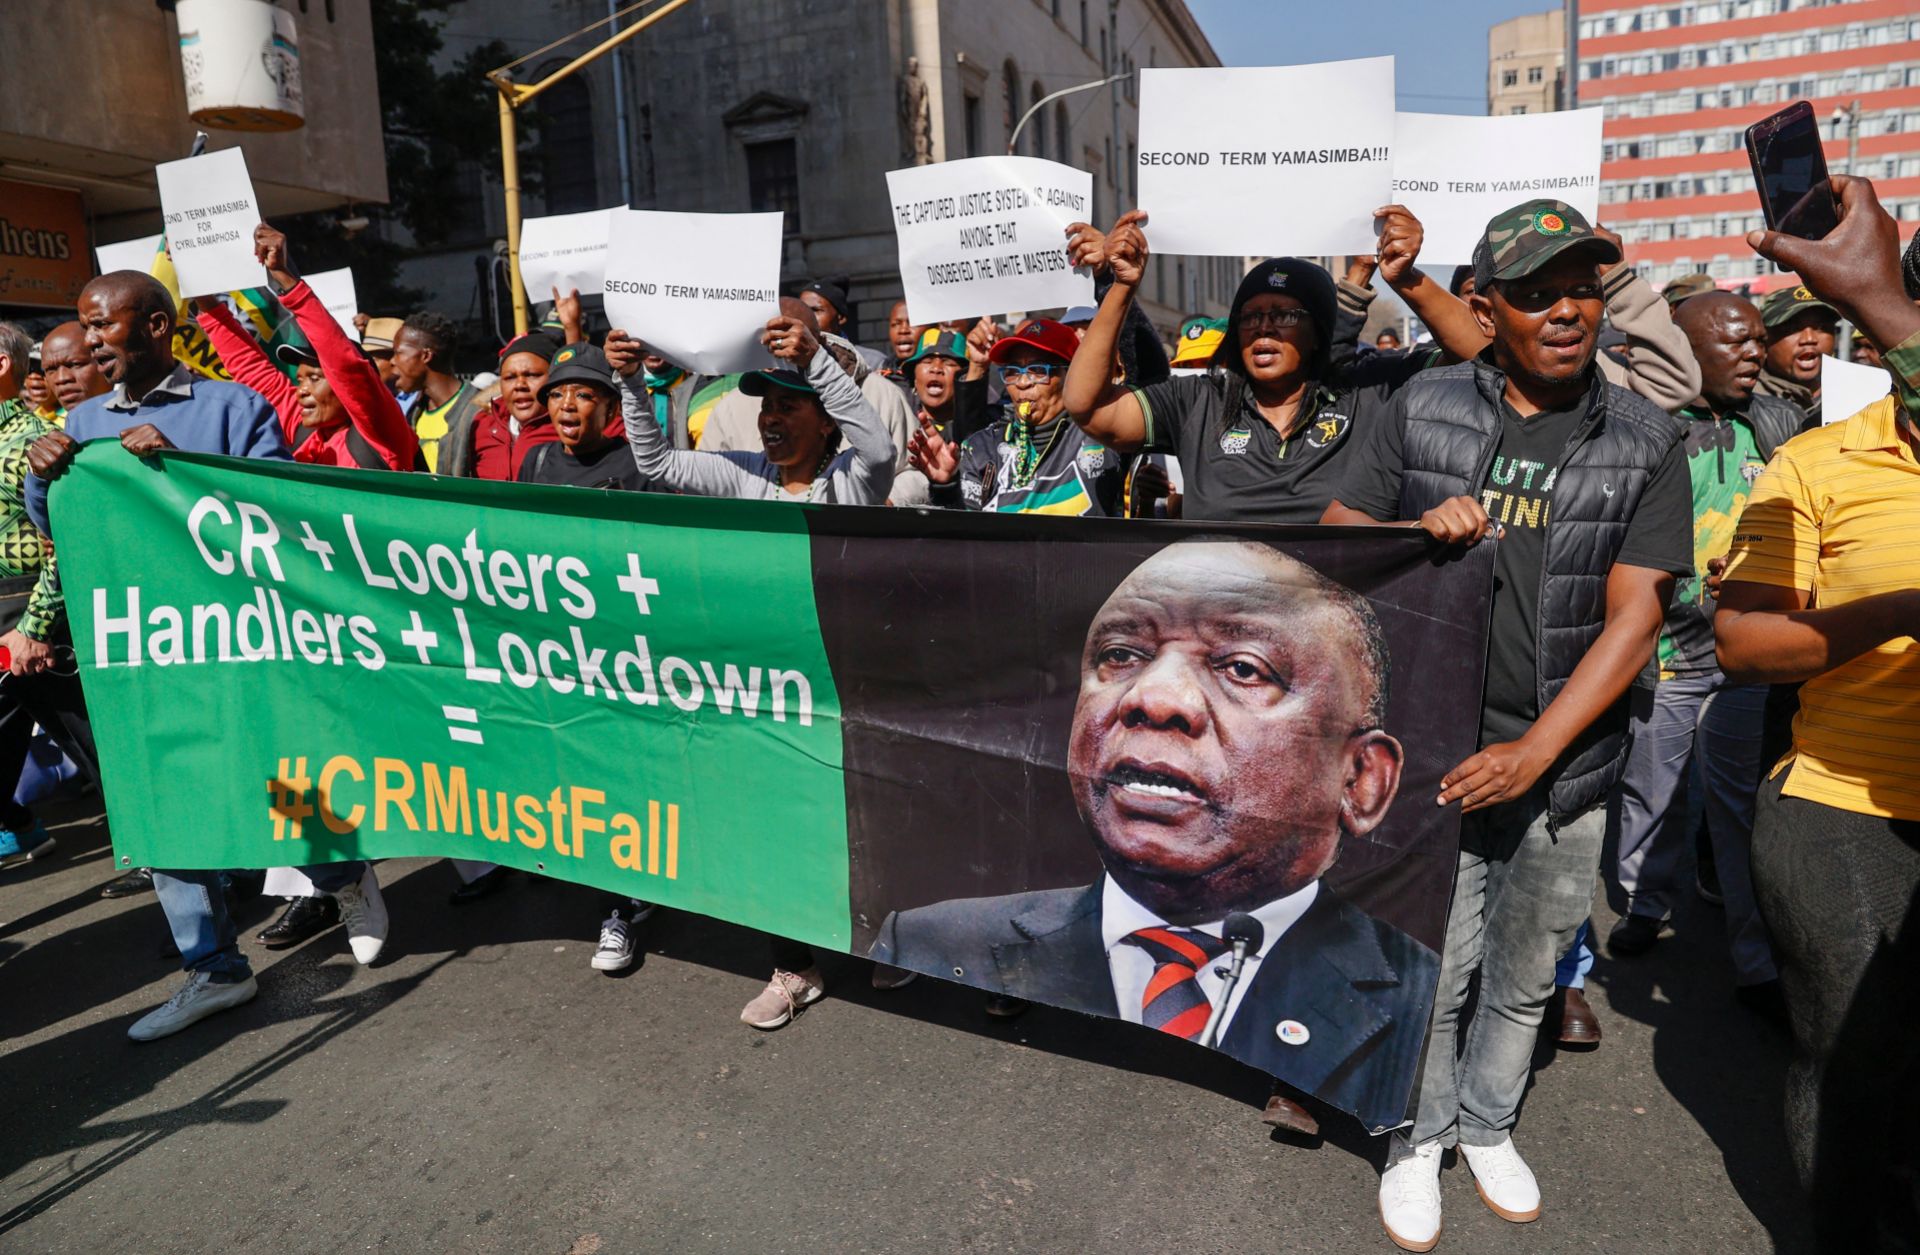 Disgruntled members of South Africa’s ruling African National Congress (ANC) party march to the party’s headquarters in Johannesburg, holding a poster reflecting the face of South African President Cyril Ramaphosa, on July 15, 2022.